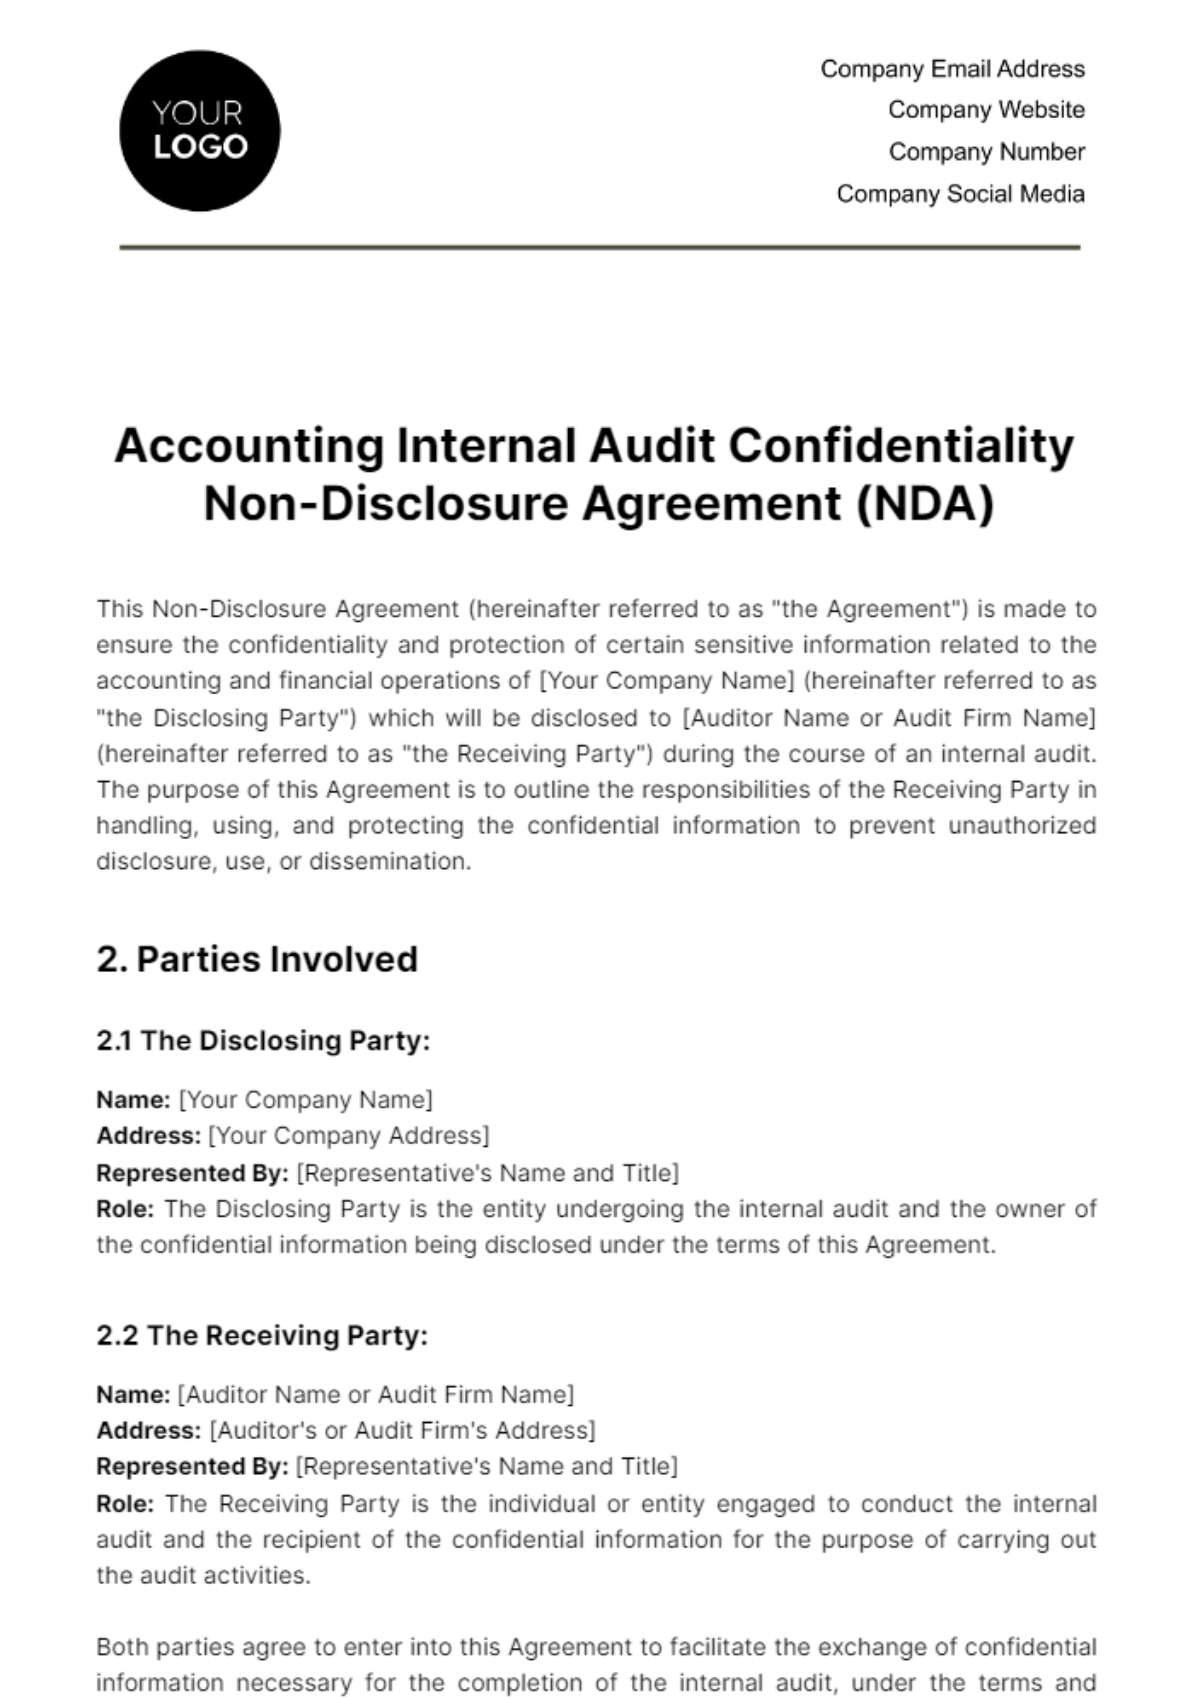 Accounting Internal Audit Confidentiality NDA  Template